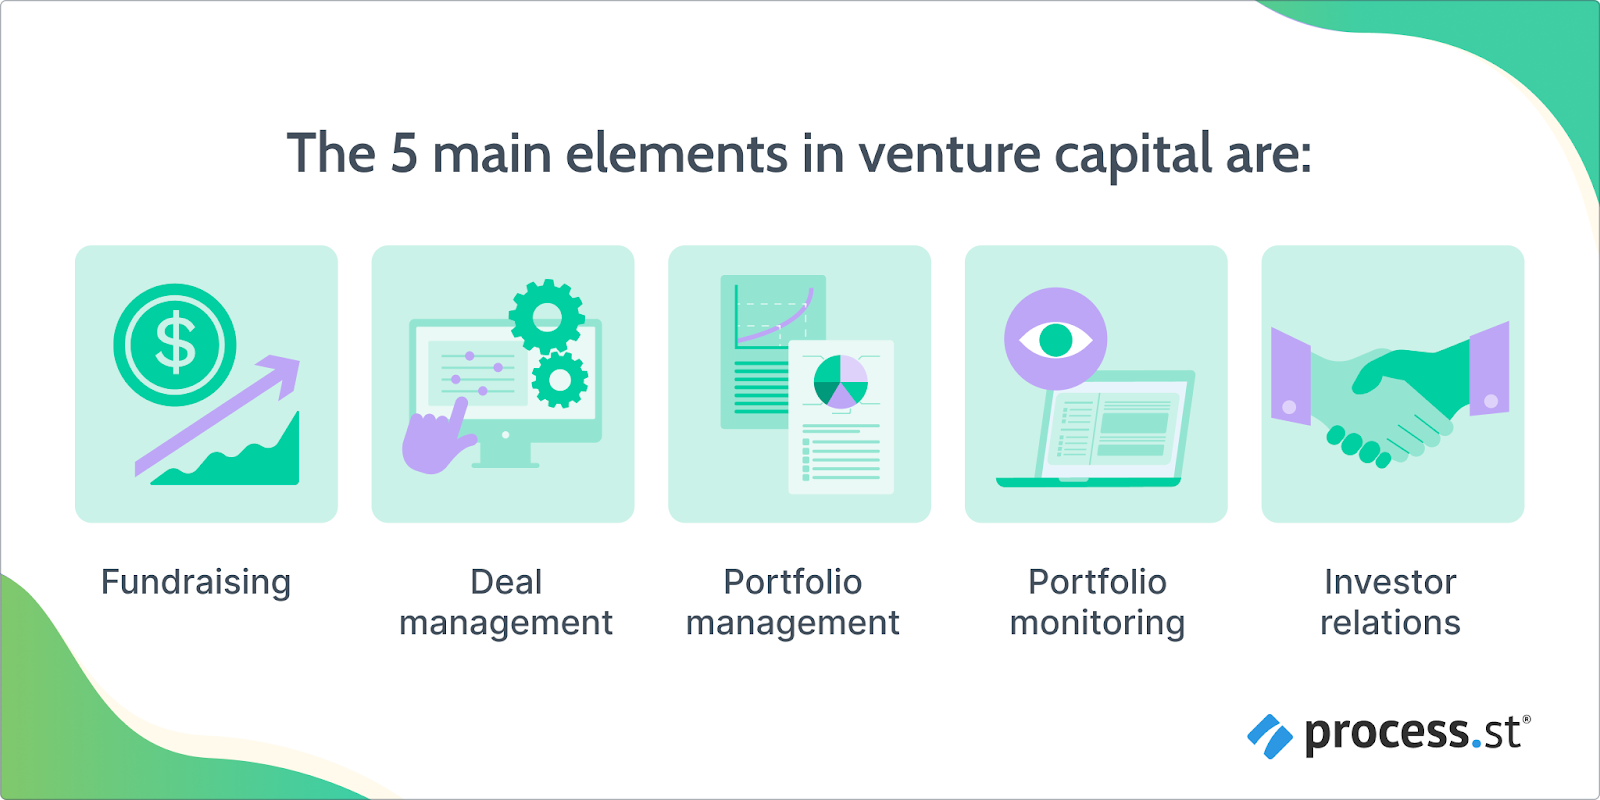 Image showing the main elements of venture capital tools 